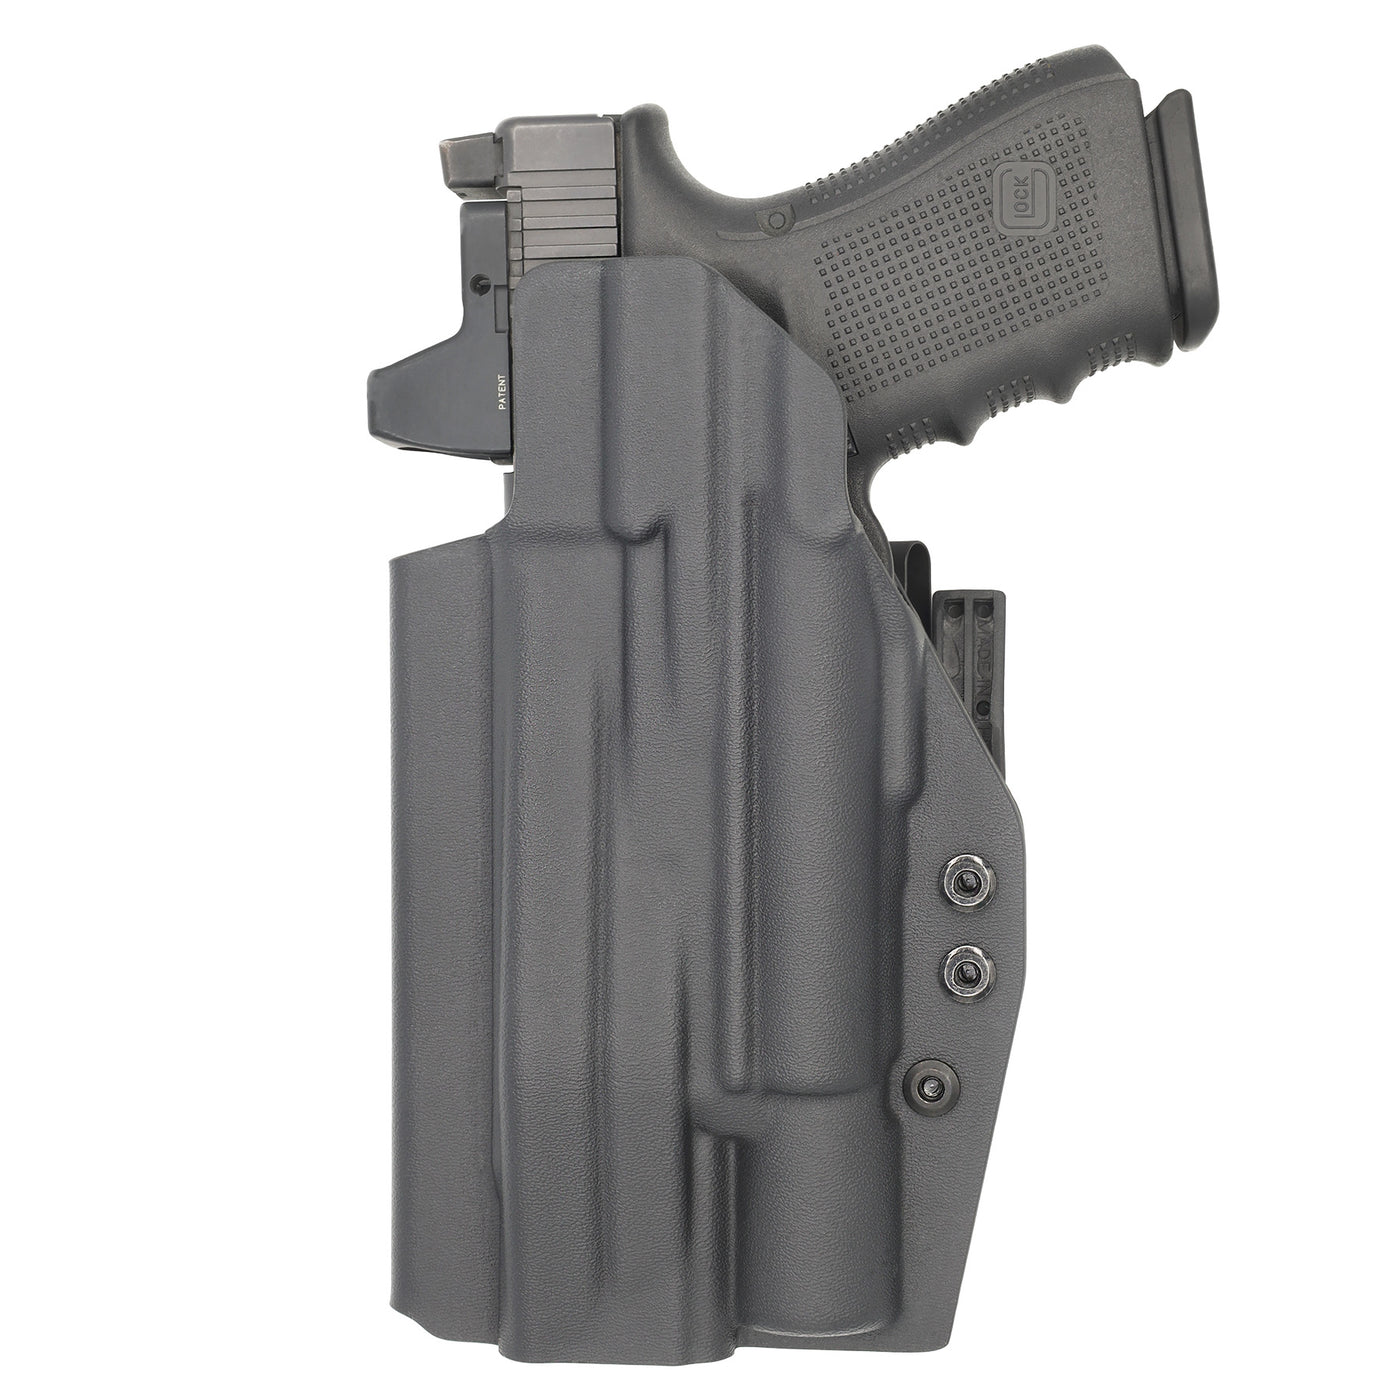 C&G Holsters Quickship IWB ALPHA UPGRADE Tactical Poly80 Surefire X300 in holstered position back view